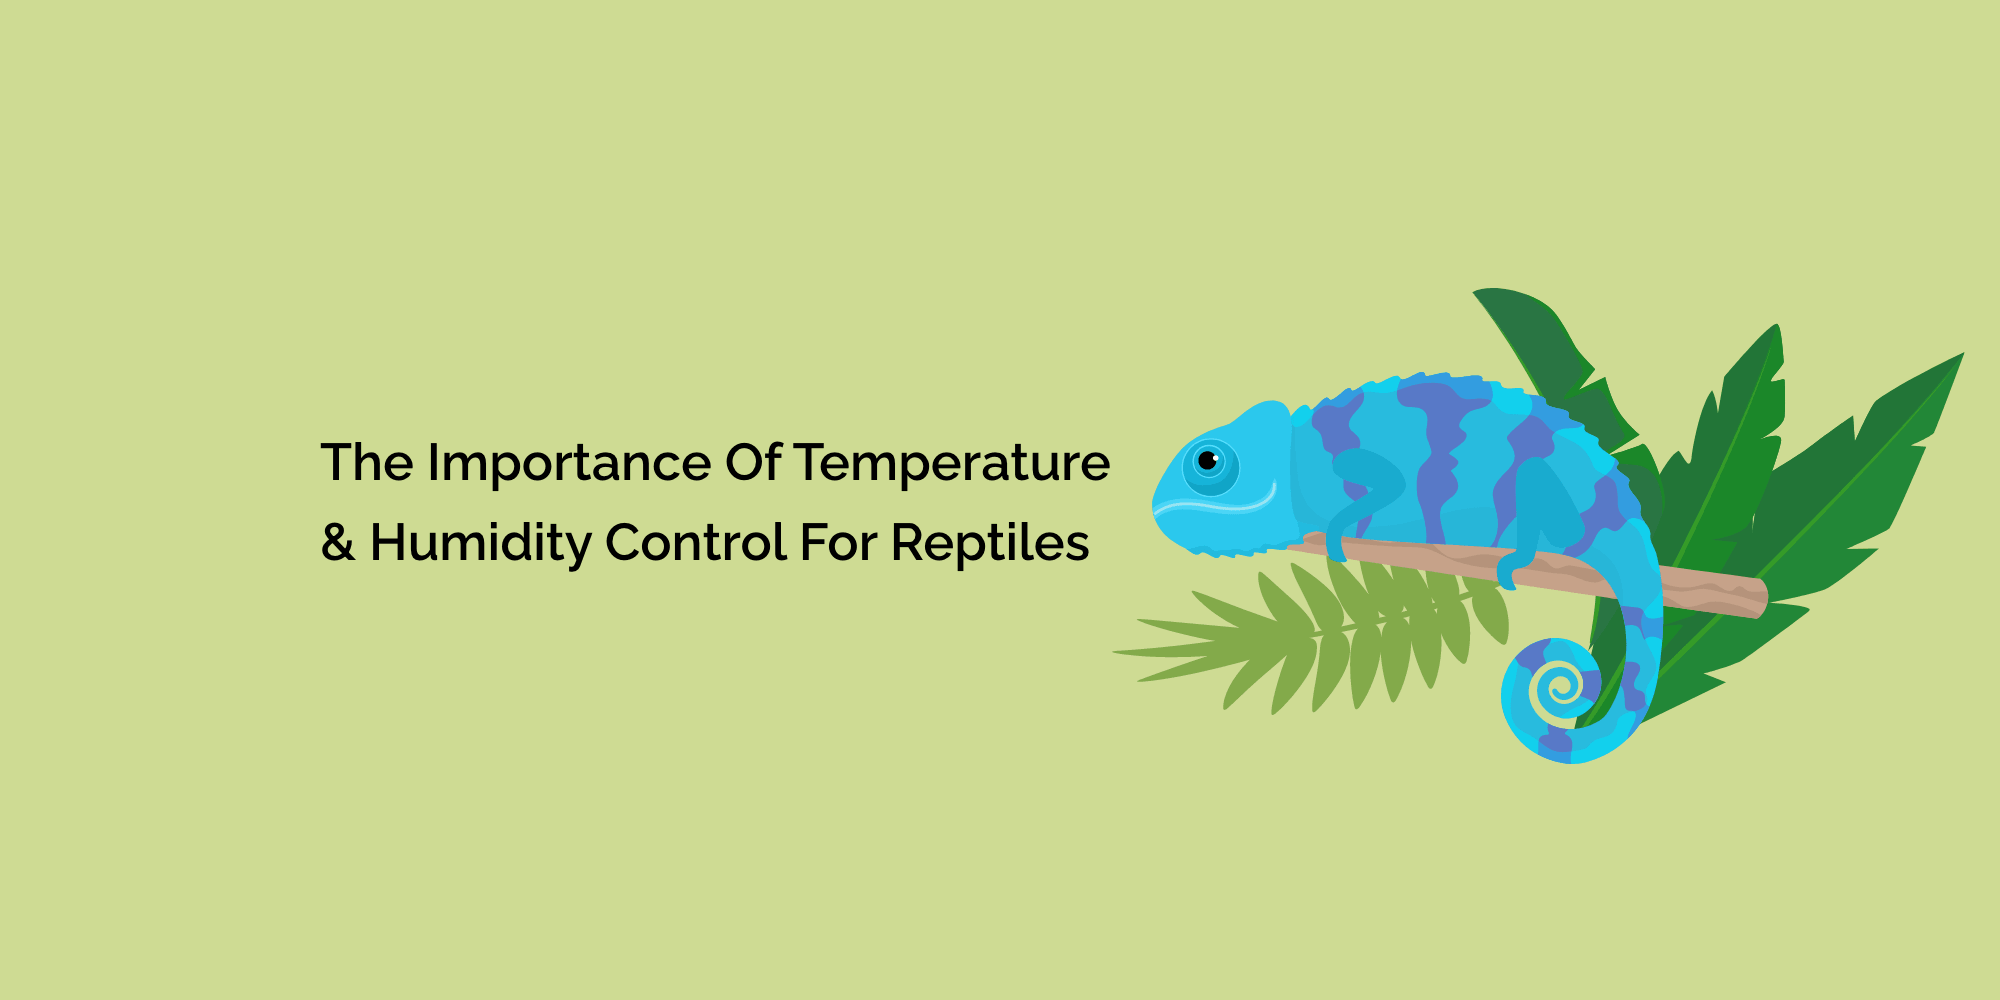 The Importance of Temperature & Humidity Control for Reptiles